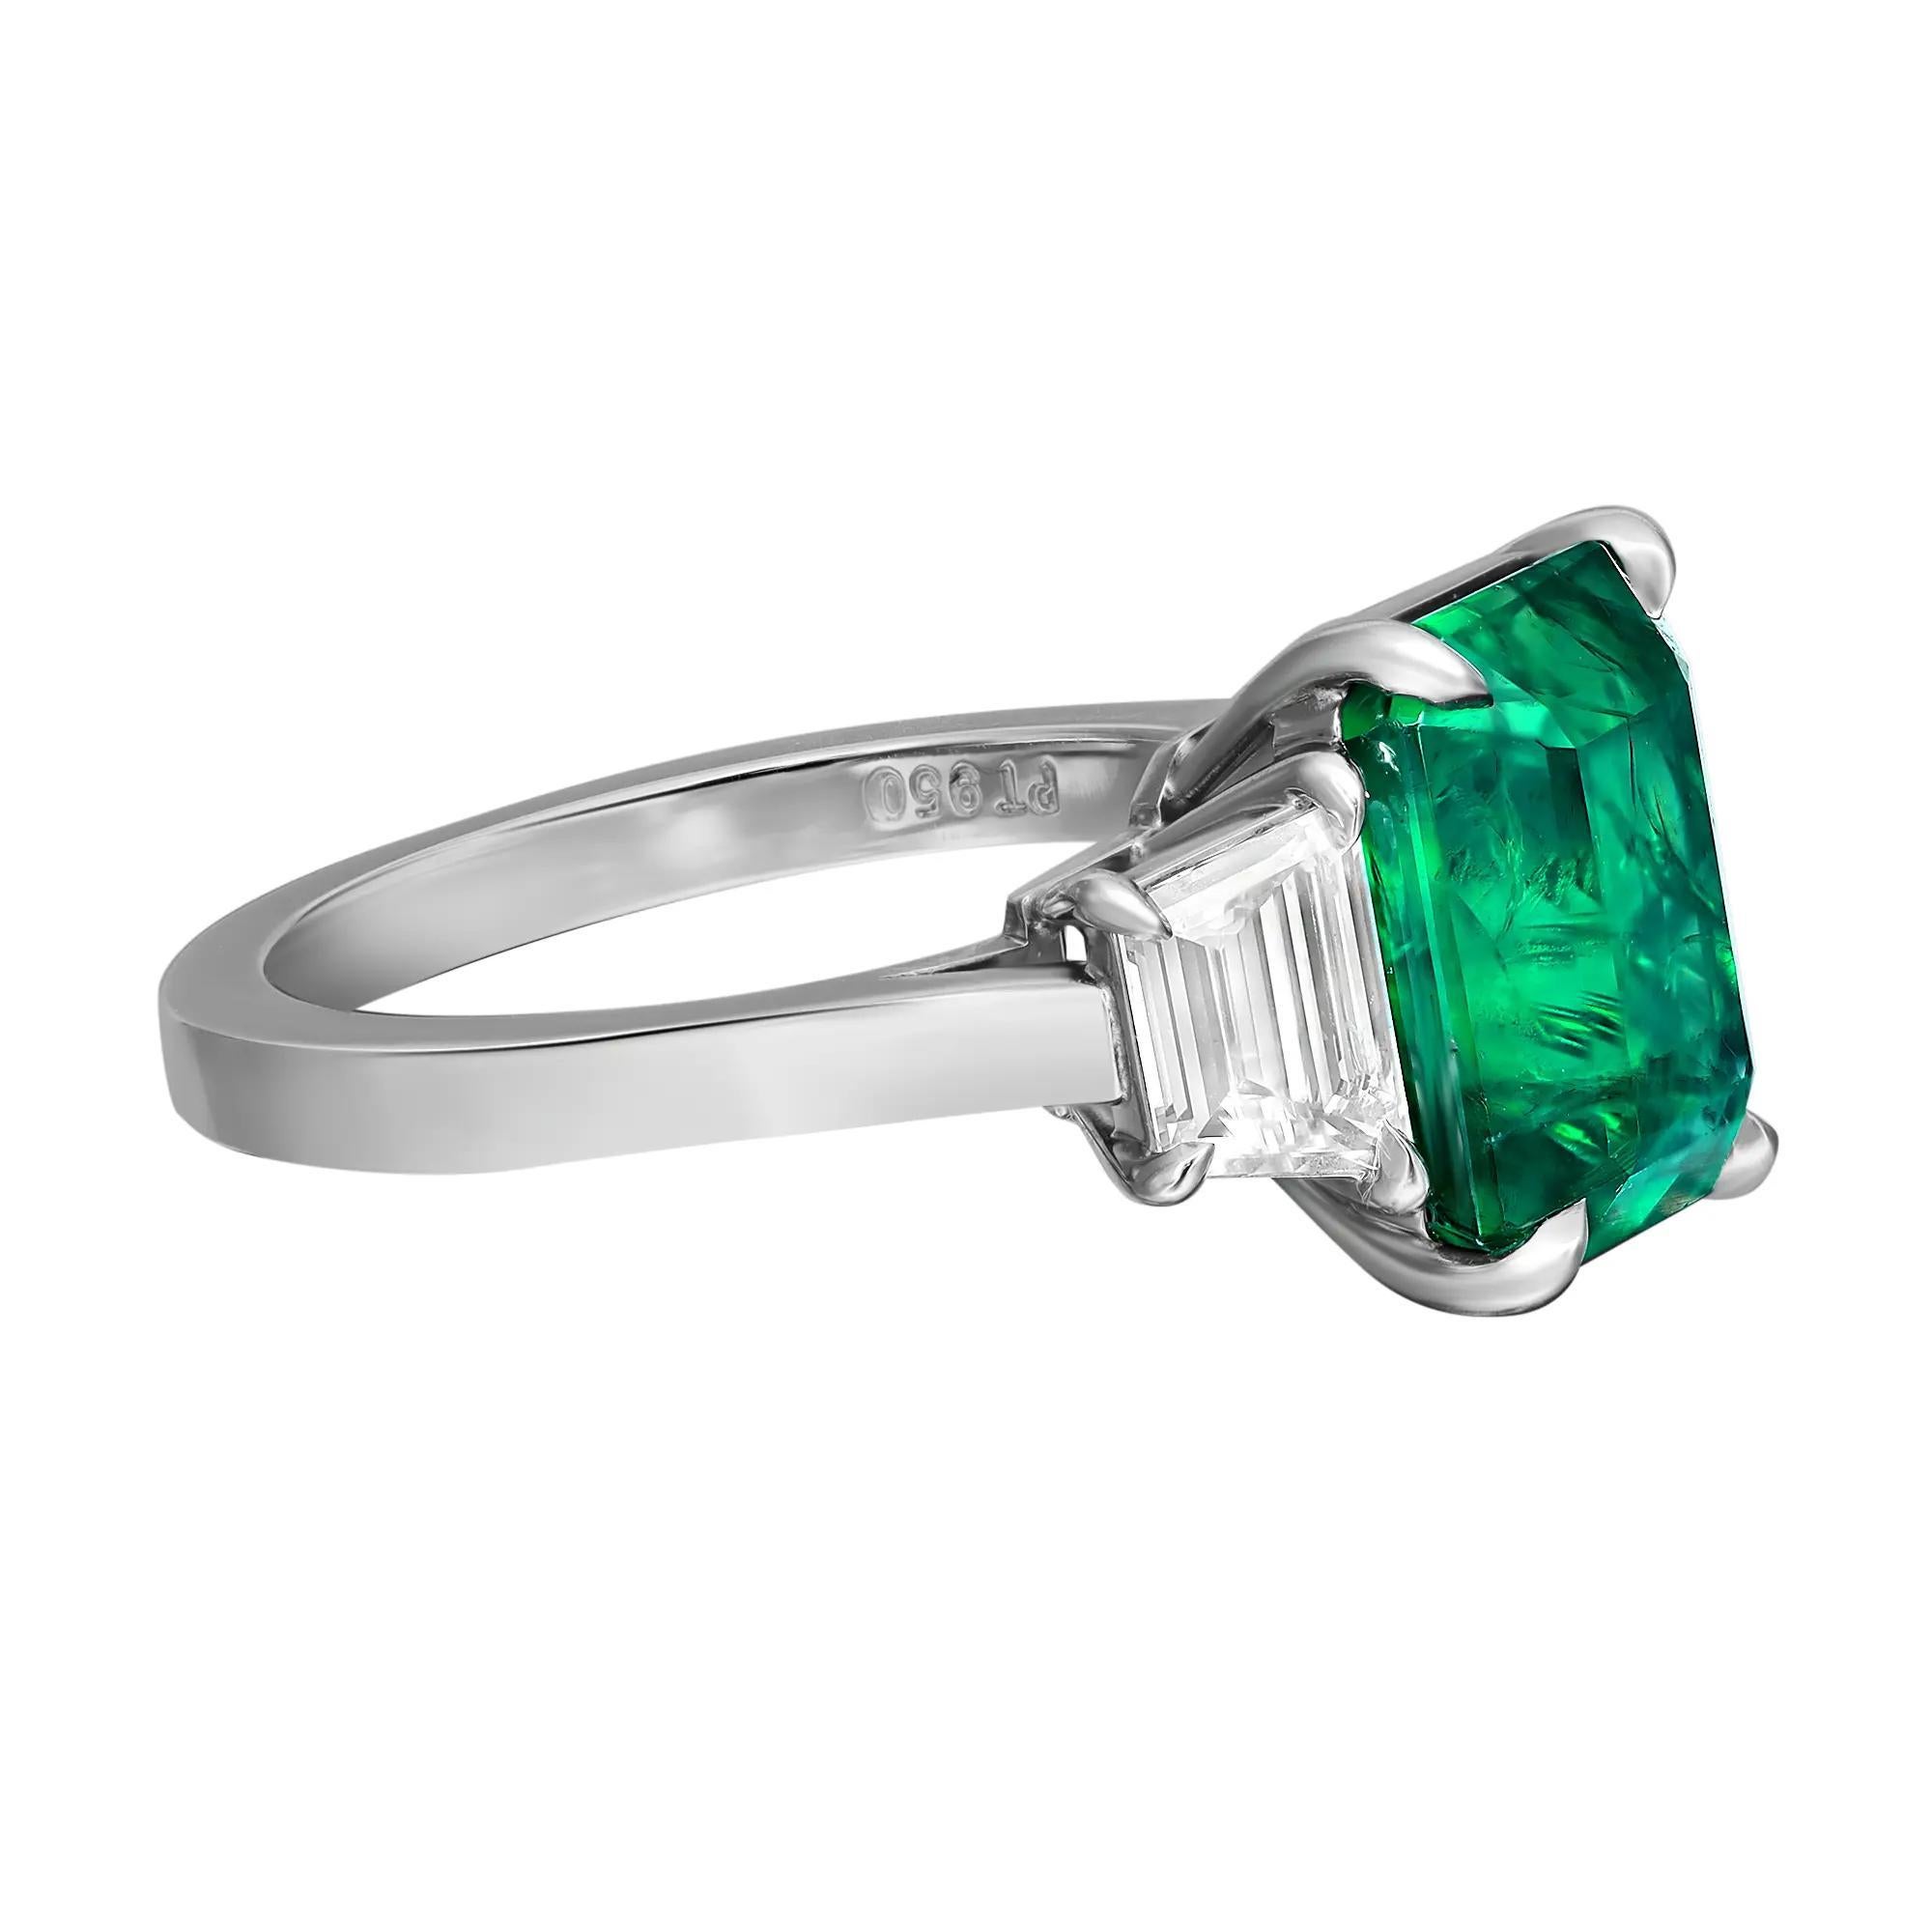 This luxurious three-stone engagement ring features a stunning 4.30 carats GIA certified octagonal Zambian green Emerald as the center stone with 0.83 carat of trapezoid-cut diamonds on each side in prong setting. The octagonal cut gives the emerald